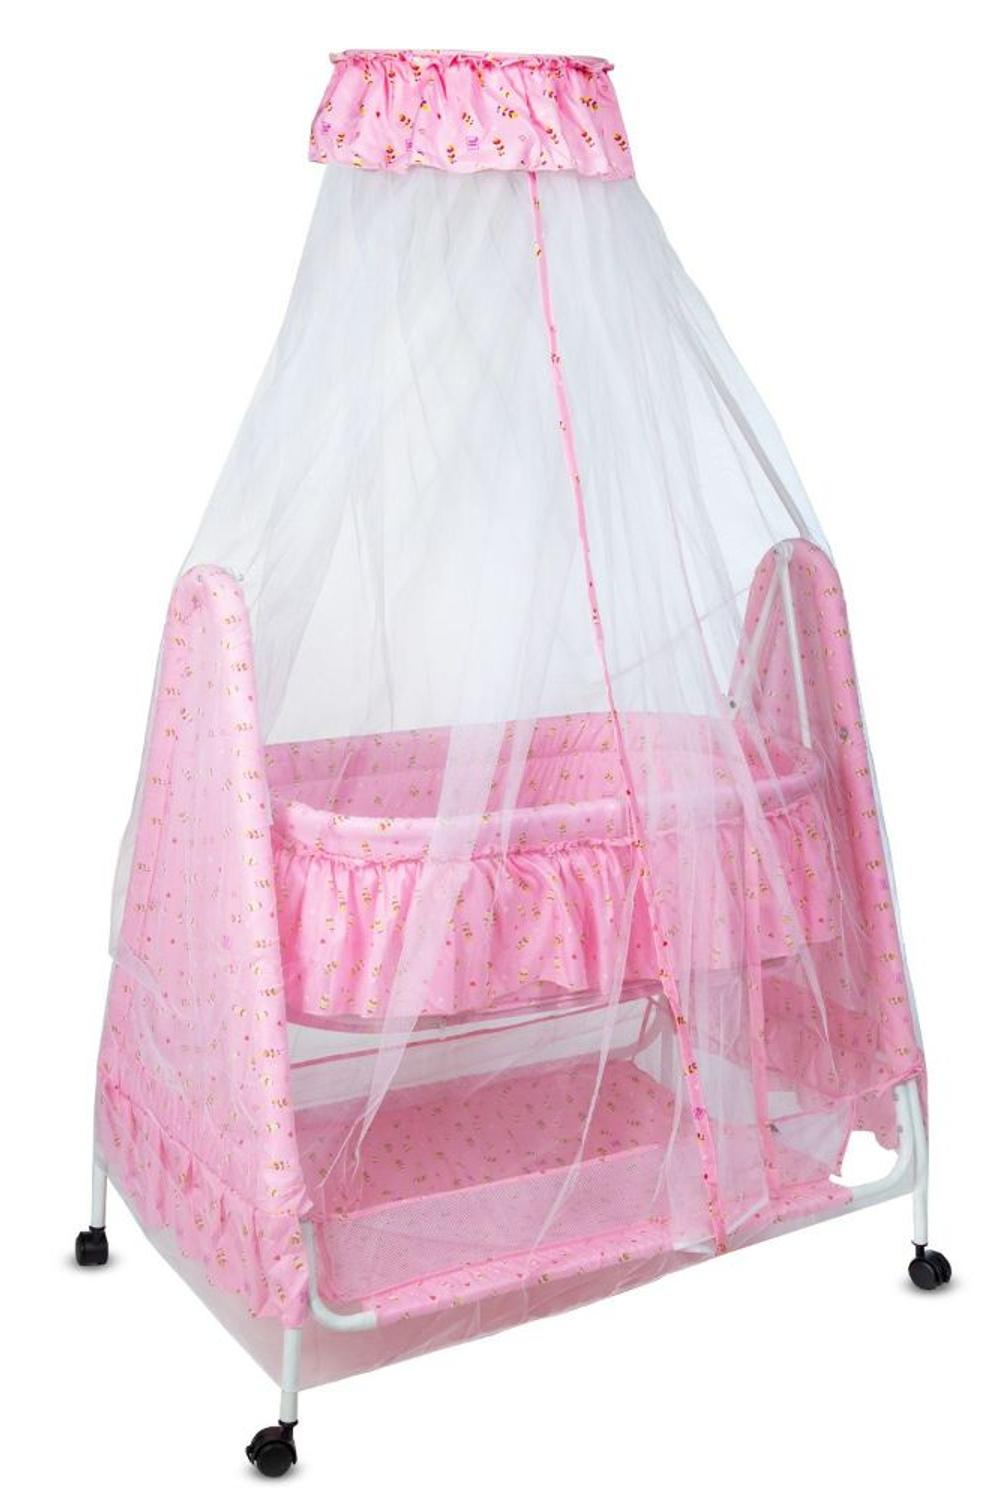 Mee Mee Spacious Swinging Baby Cradle with Mosquito Net (Pink)